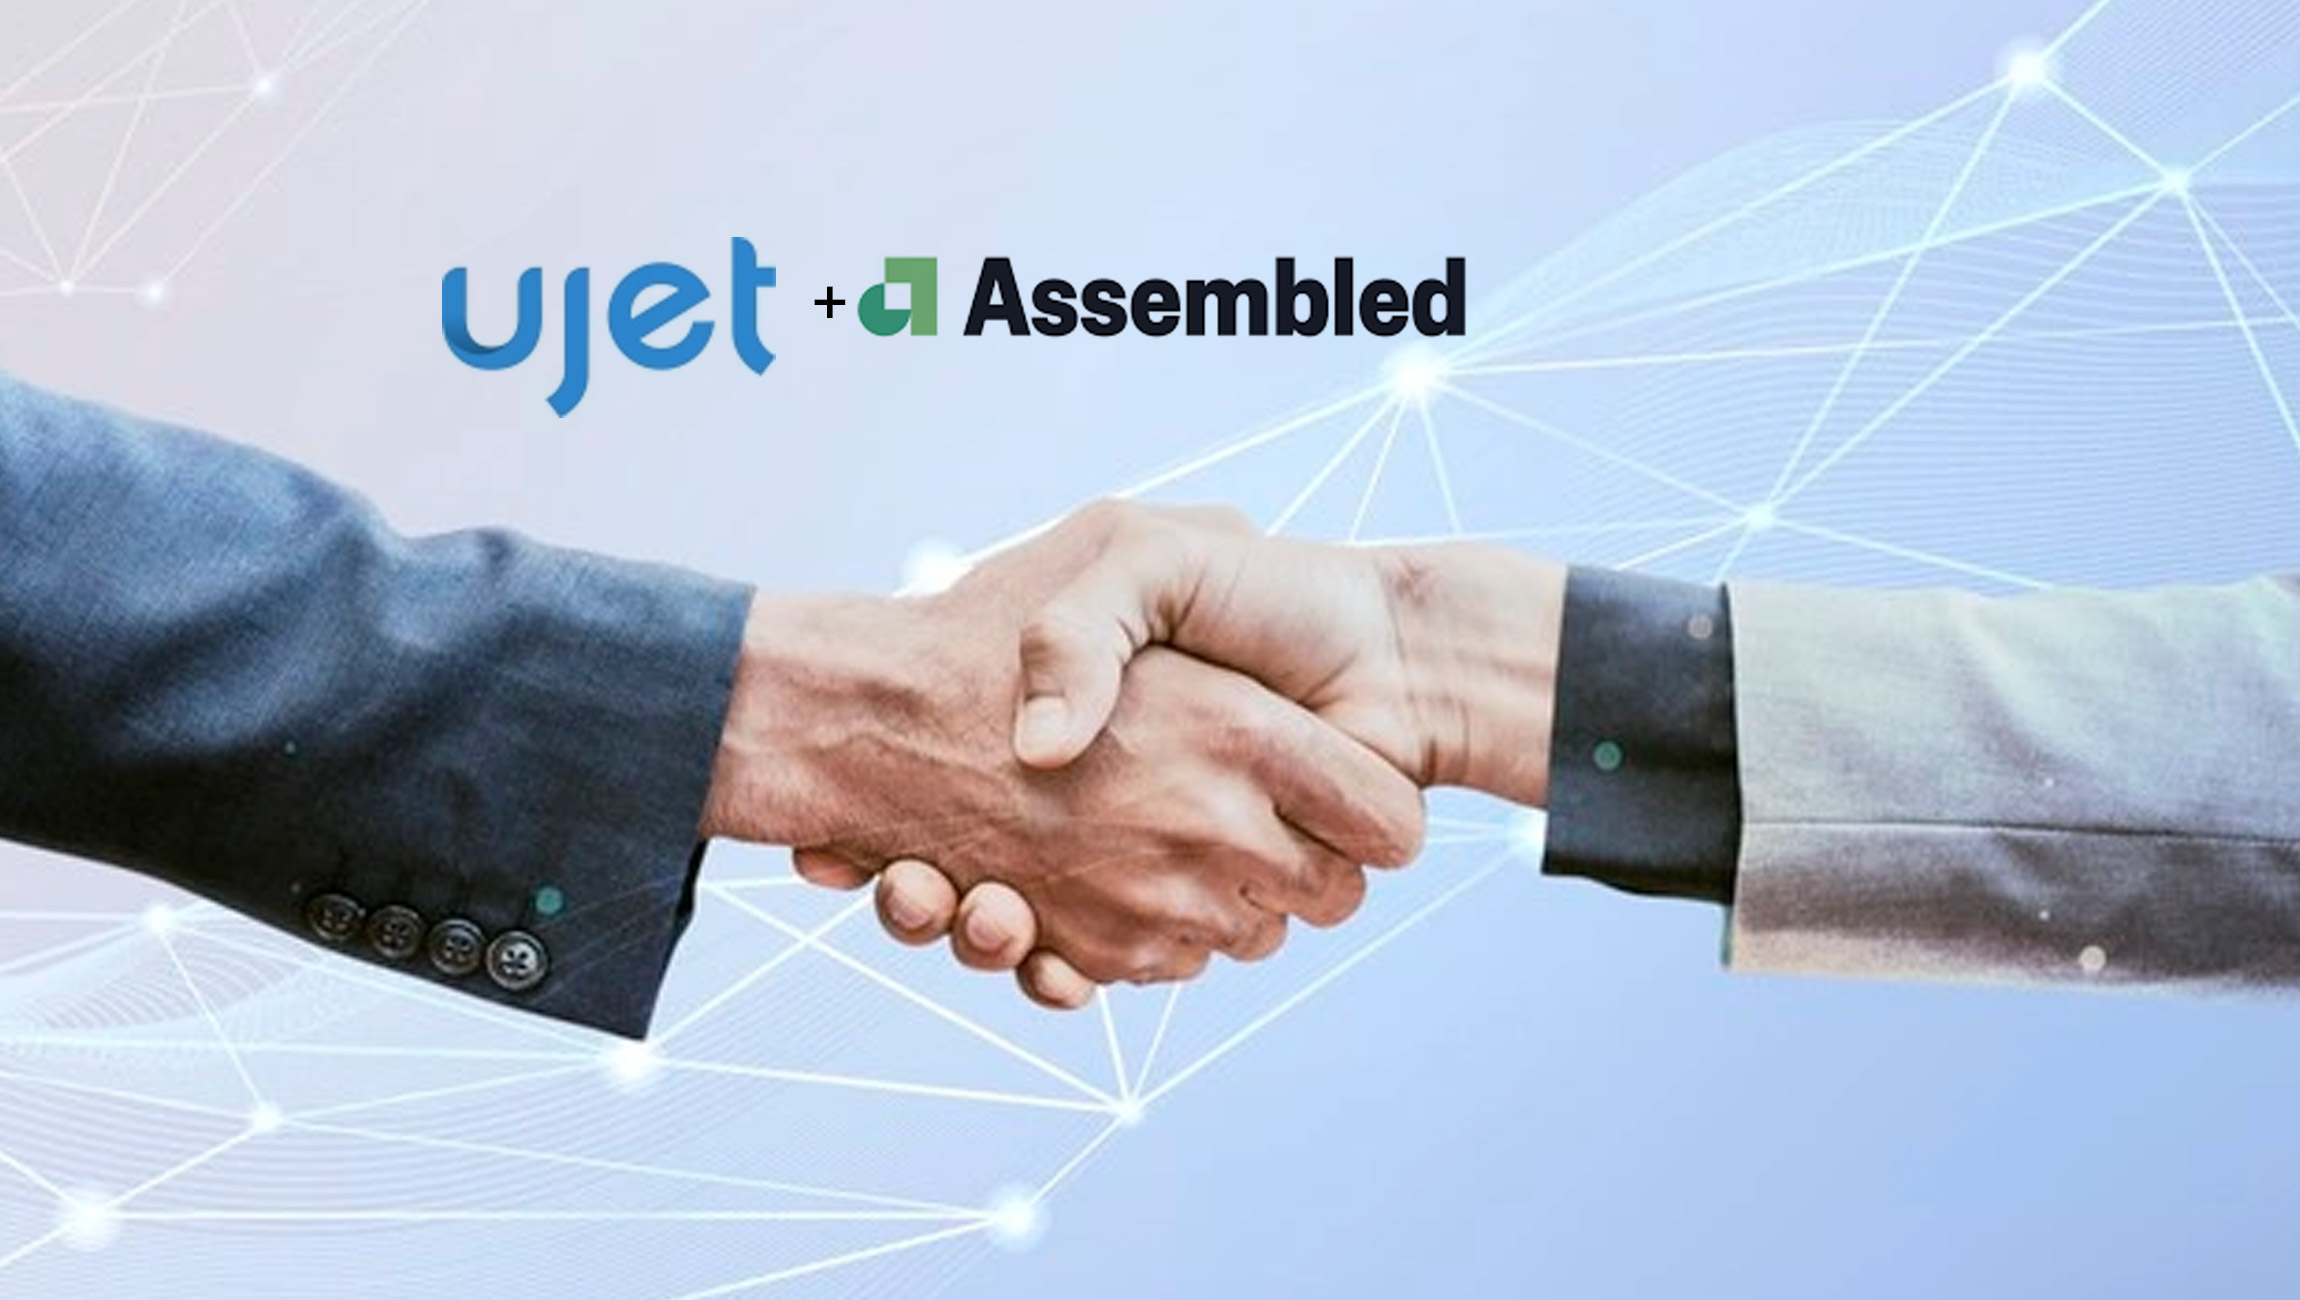 UJET and Assembled Partner to Enable Seamless Customer Service and Intelligent Workforce Management